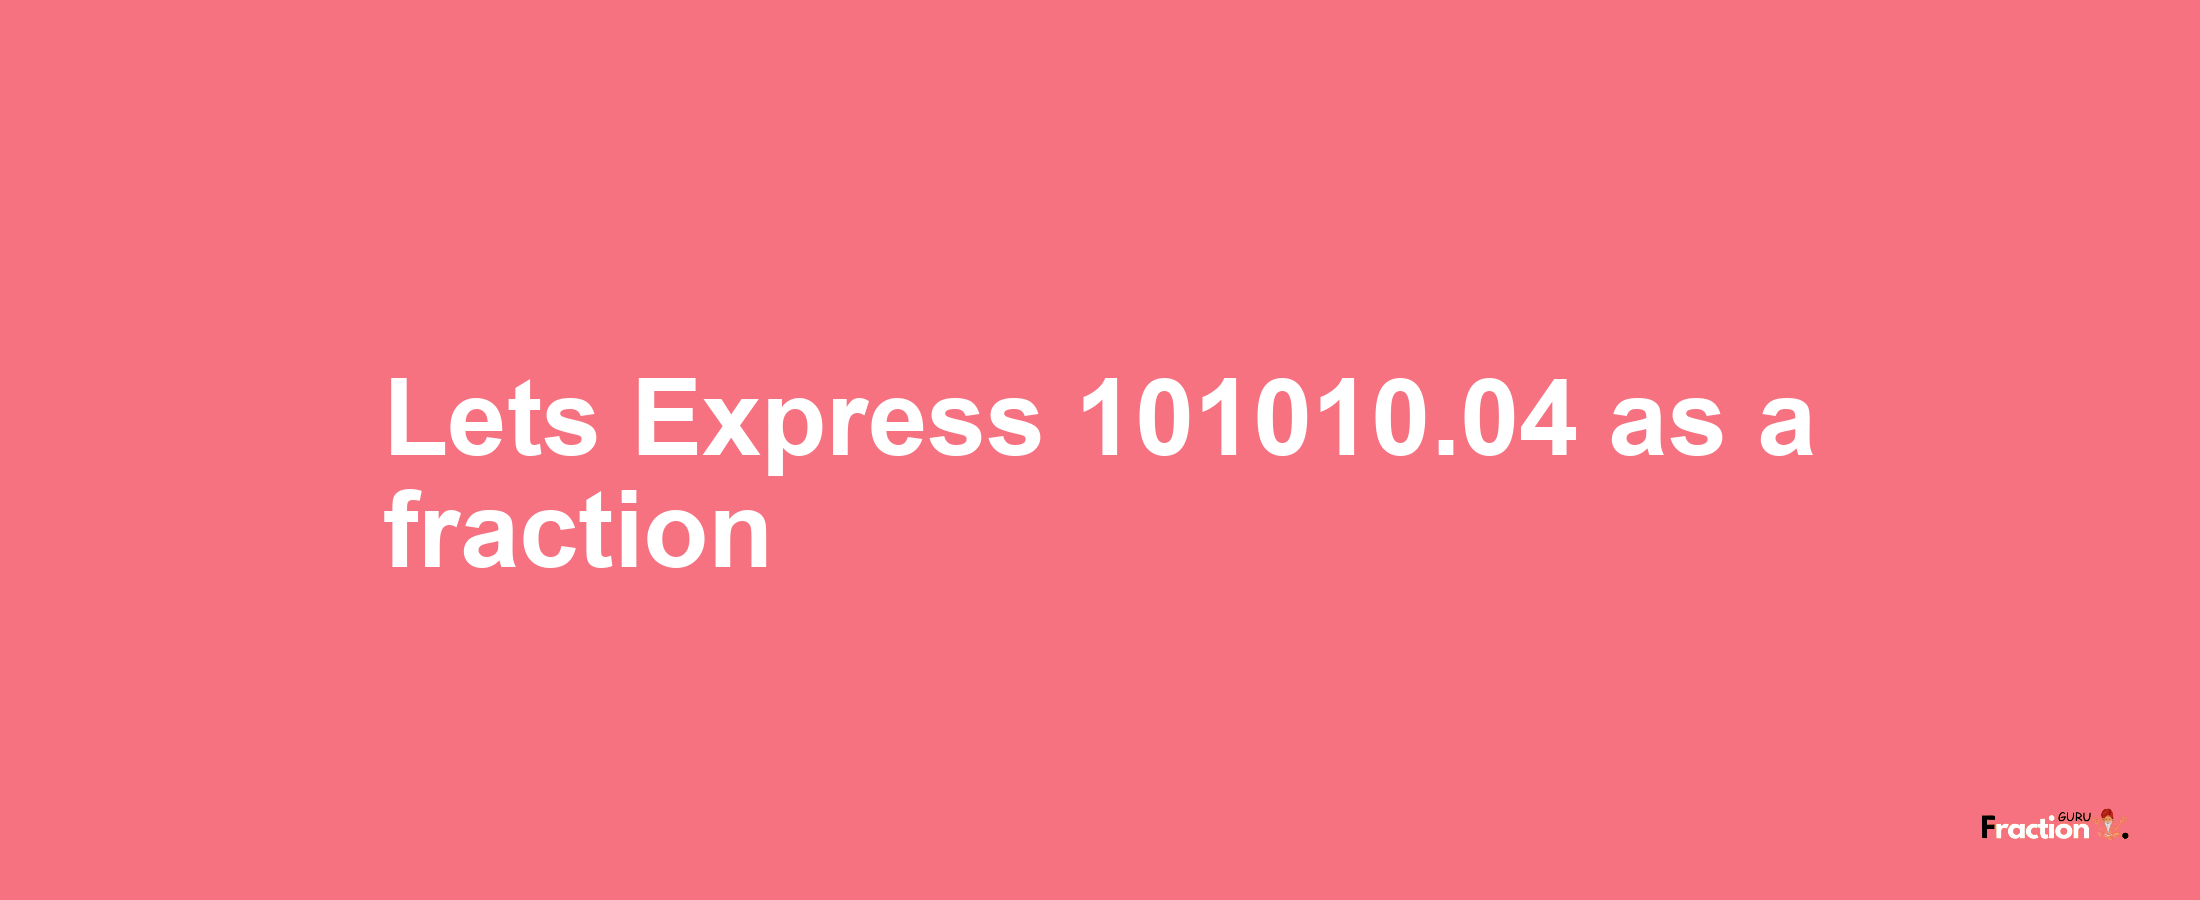 Lets Express 101010.04 as afraction